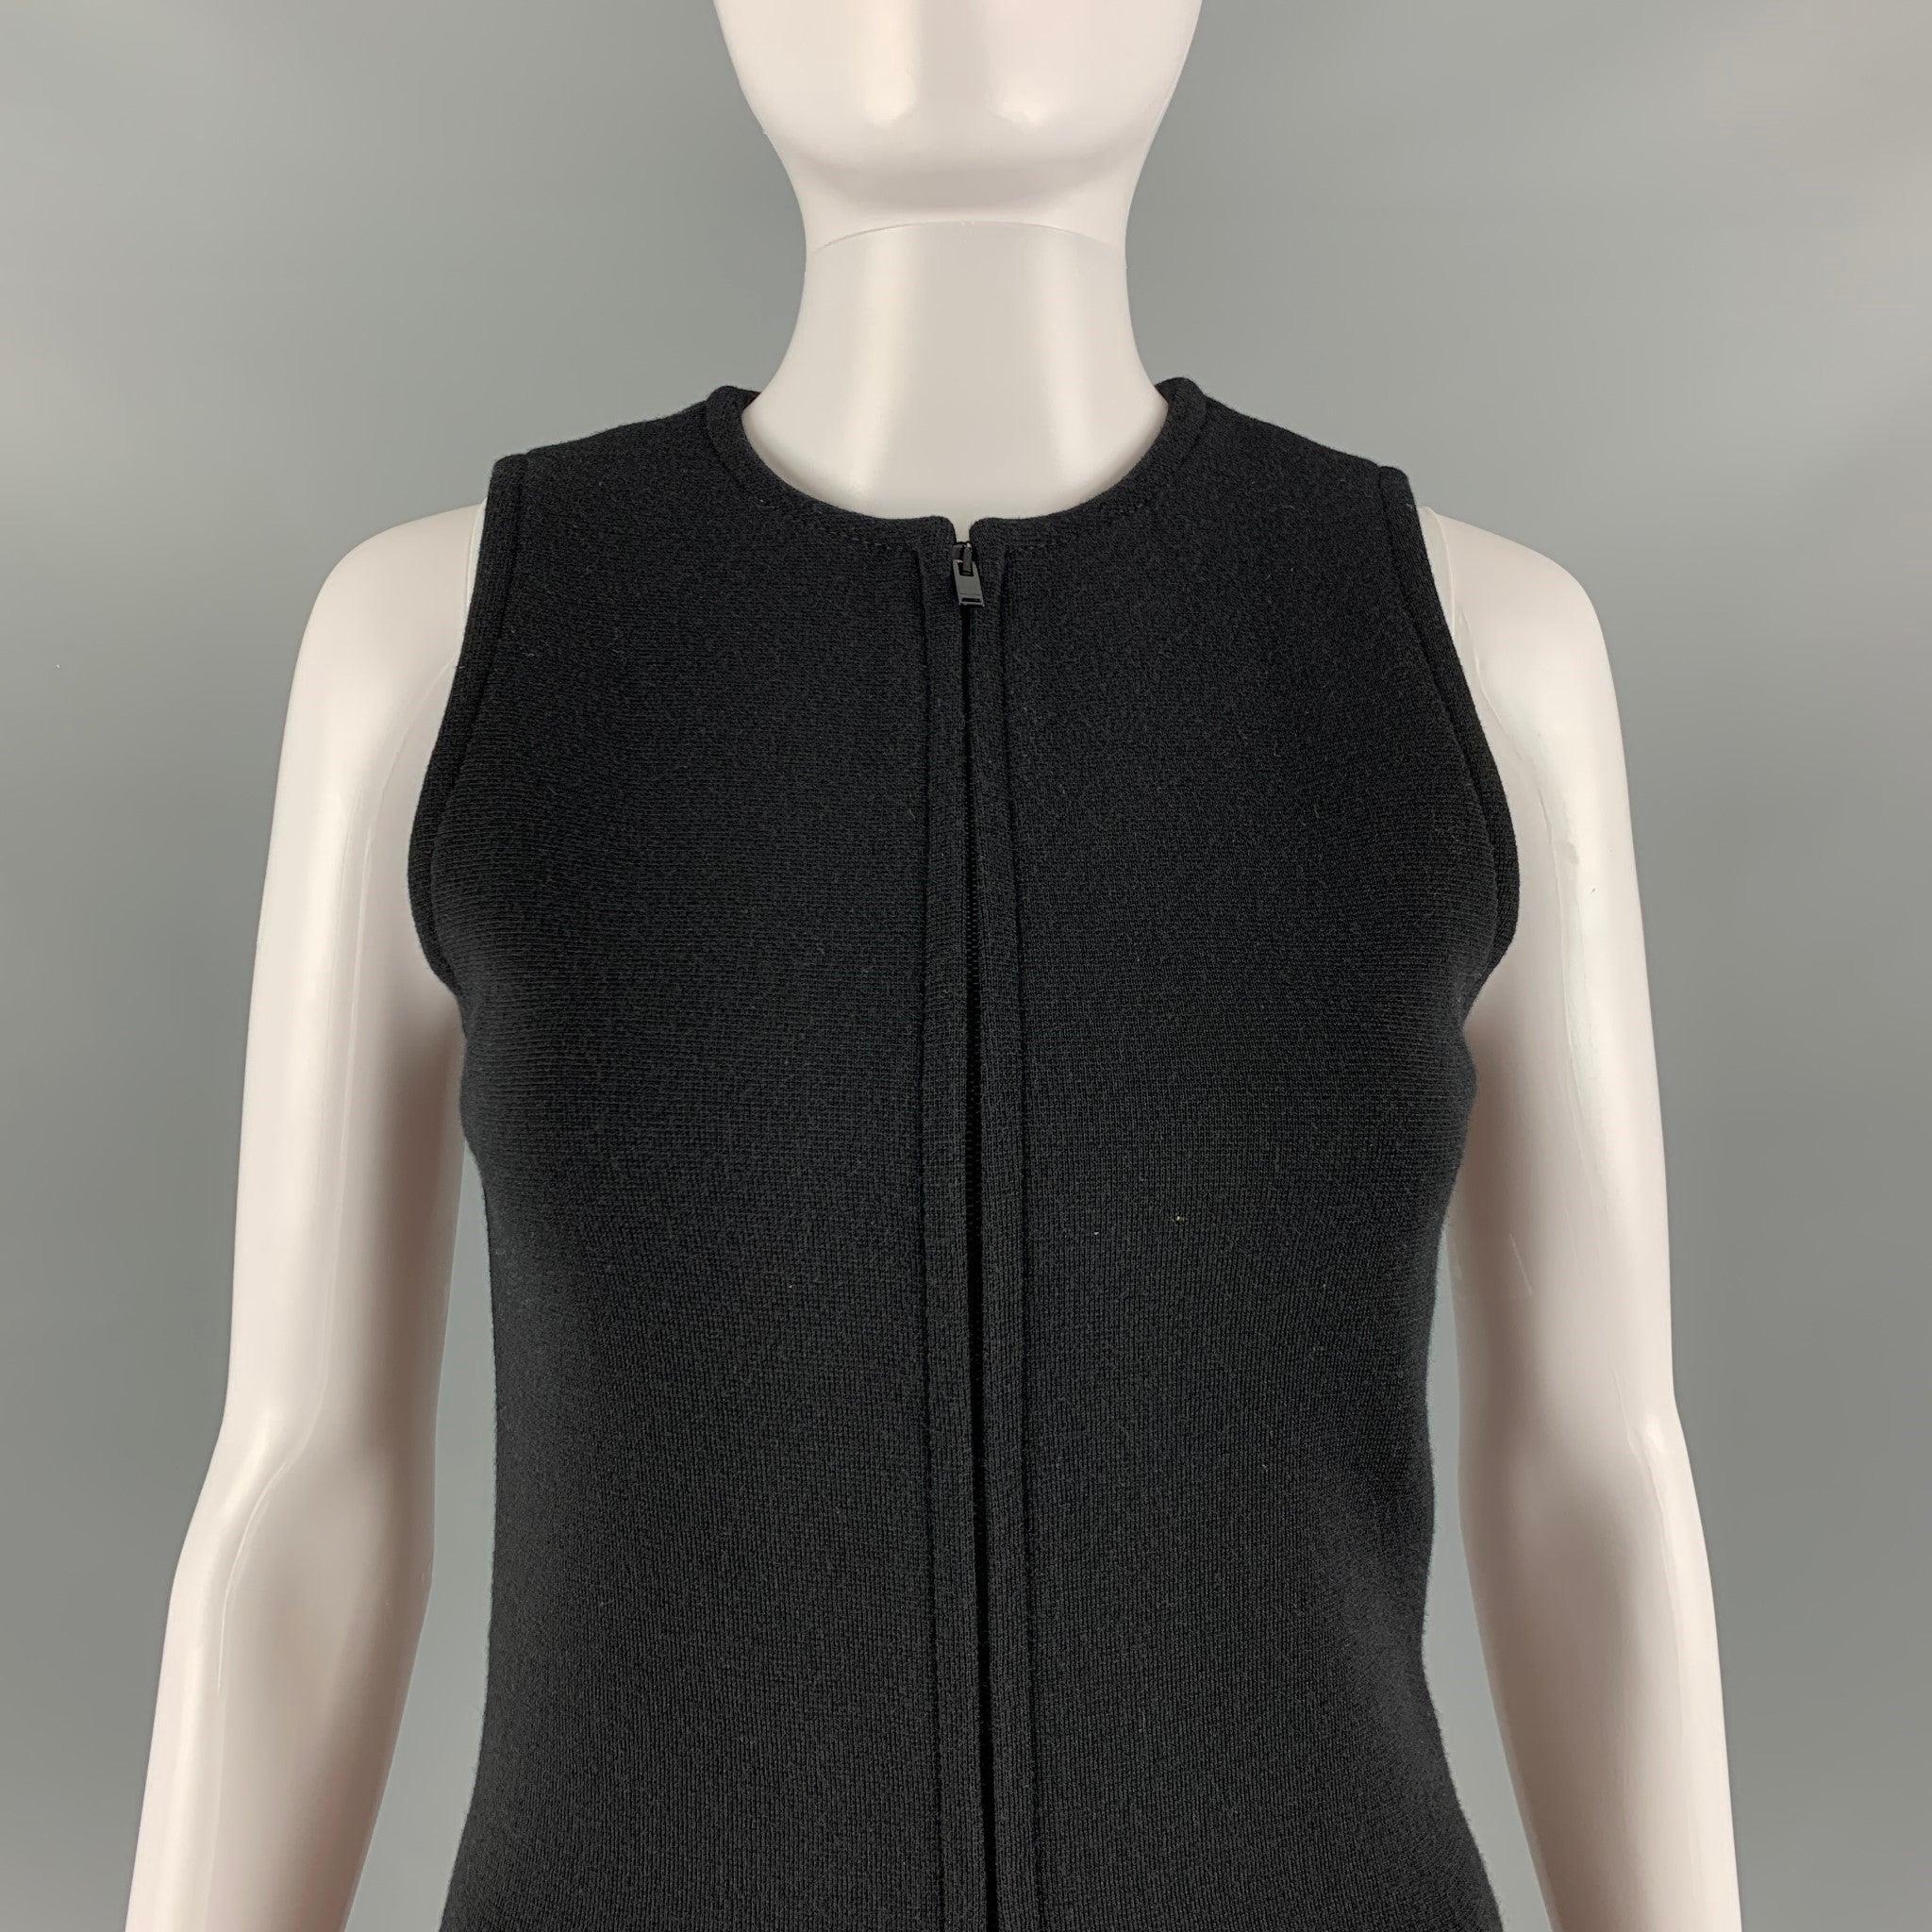 SAINT LAURENT jumpsuit comes in black wool blend knit material featuring a
 sleeveless style, and half zip up front closure. Made in Italy.Very Good Pre-Owned Condition. Minor signs of wear. 

Marked:   34 

Measurements: 
  Bust: 31 inches Waist: